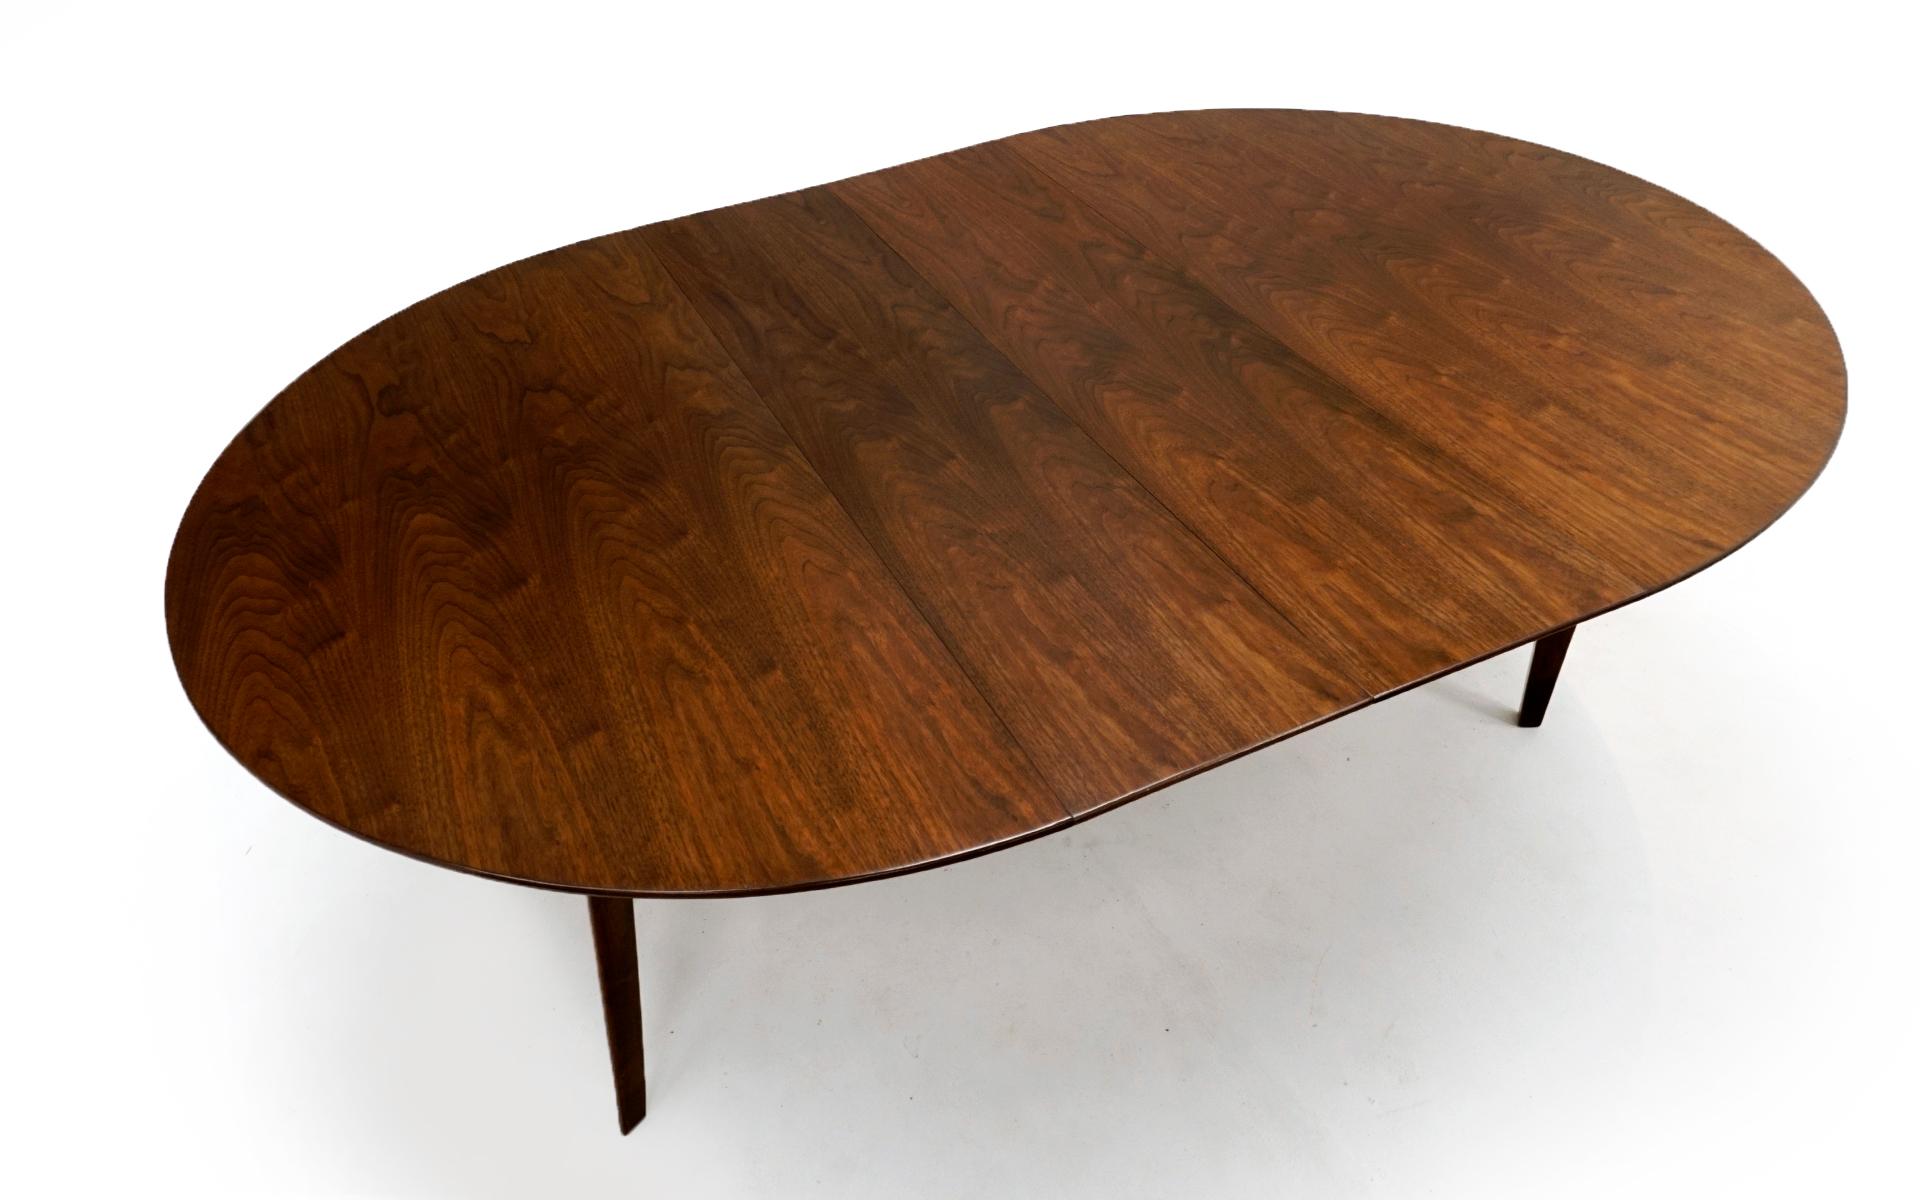 Walnut Expandable Dining Table by Edward Wormley for Dunbar, Almost Round to Oval